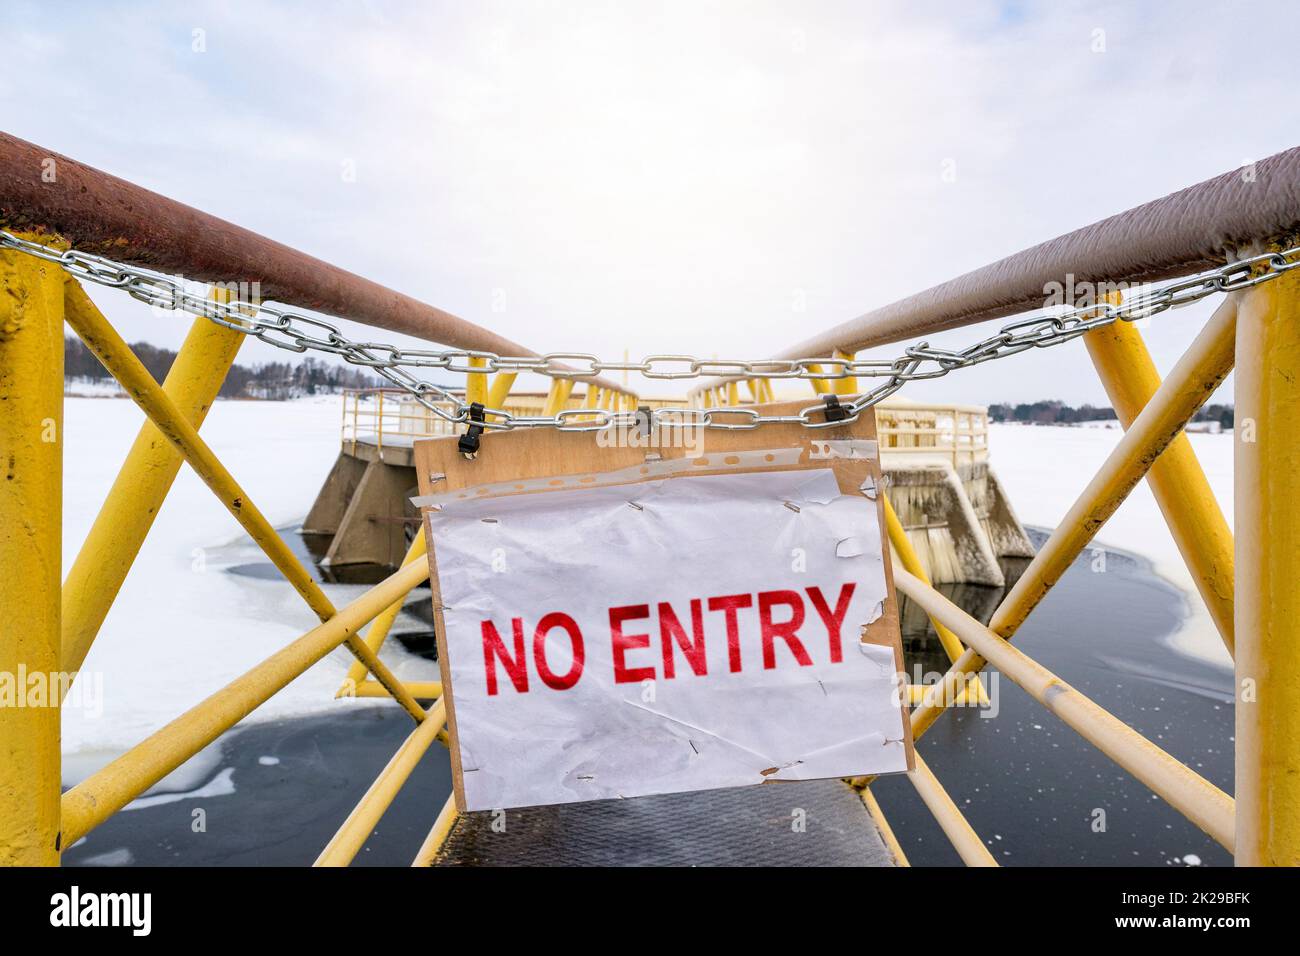 No entry sign on chain in front of yellow metallic bridge Stock Photo